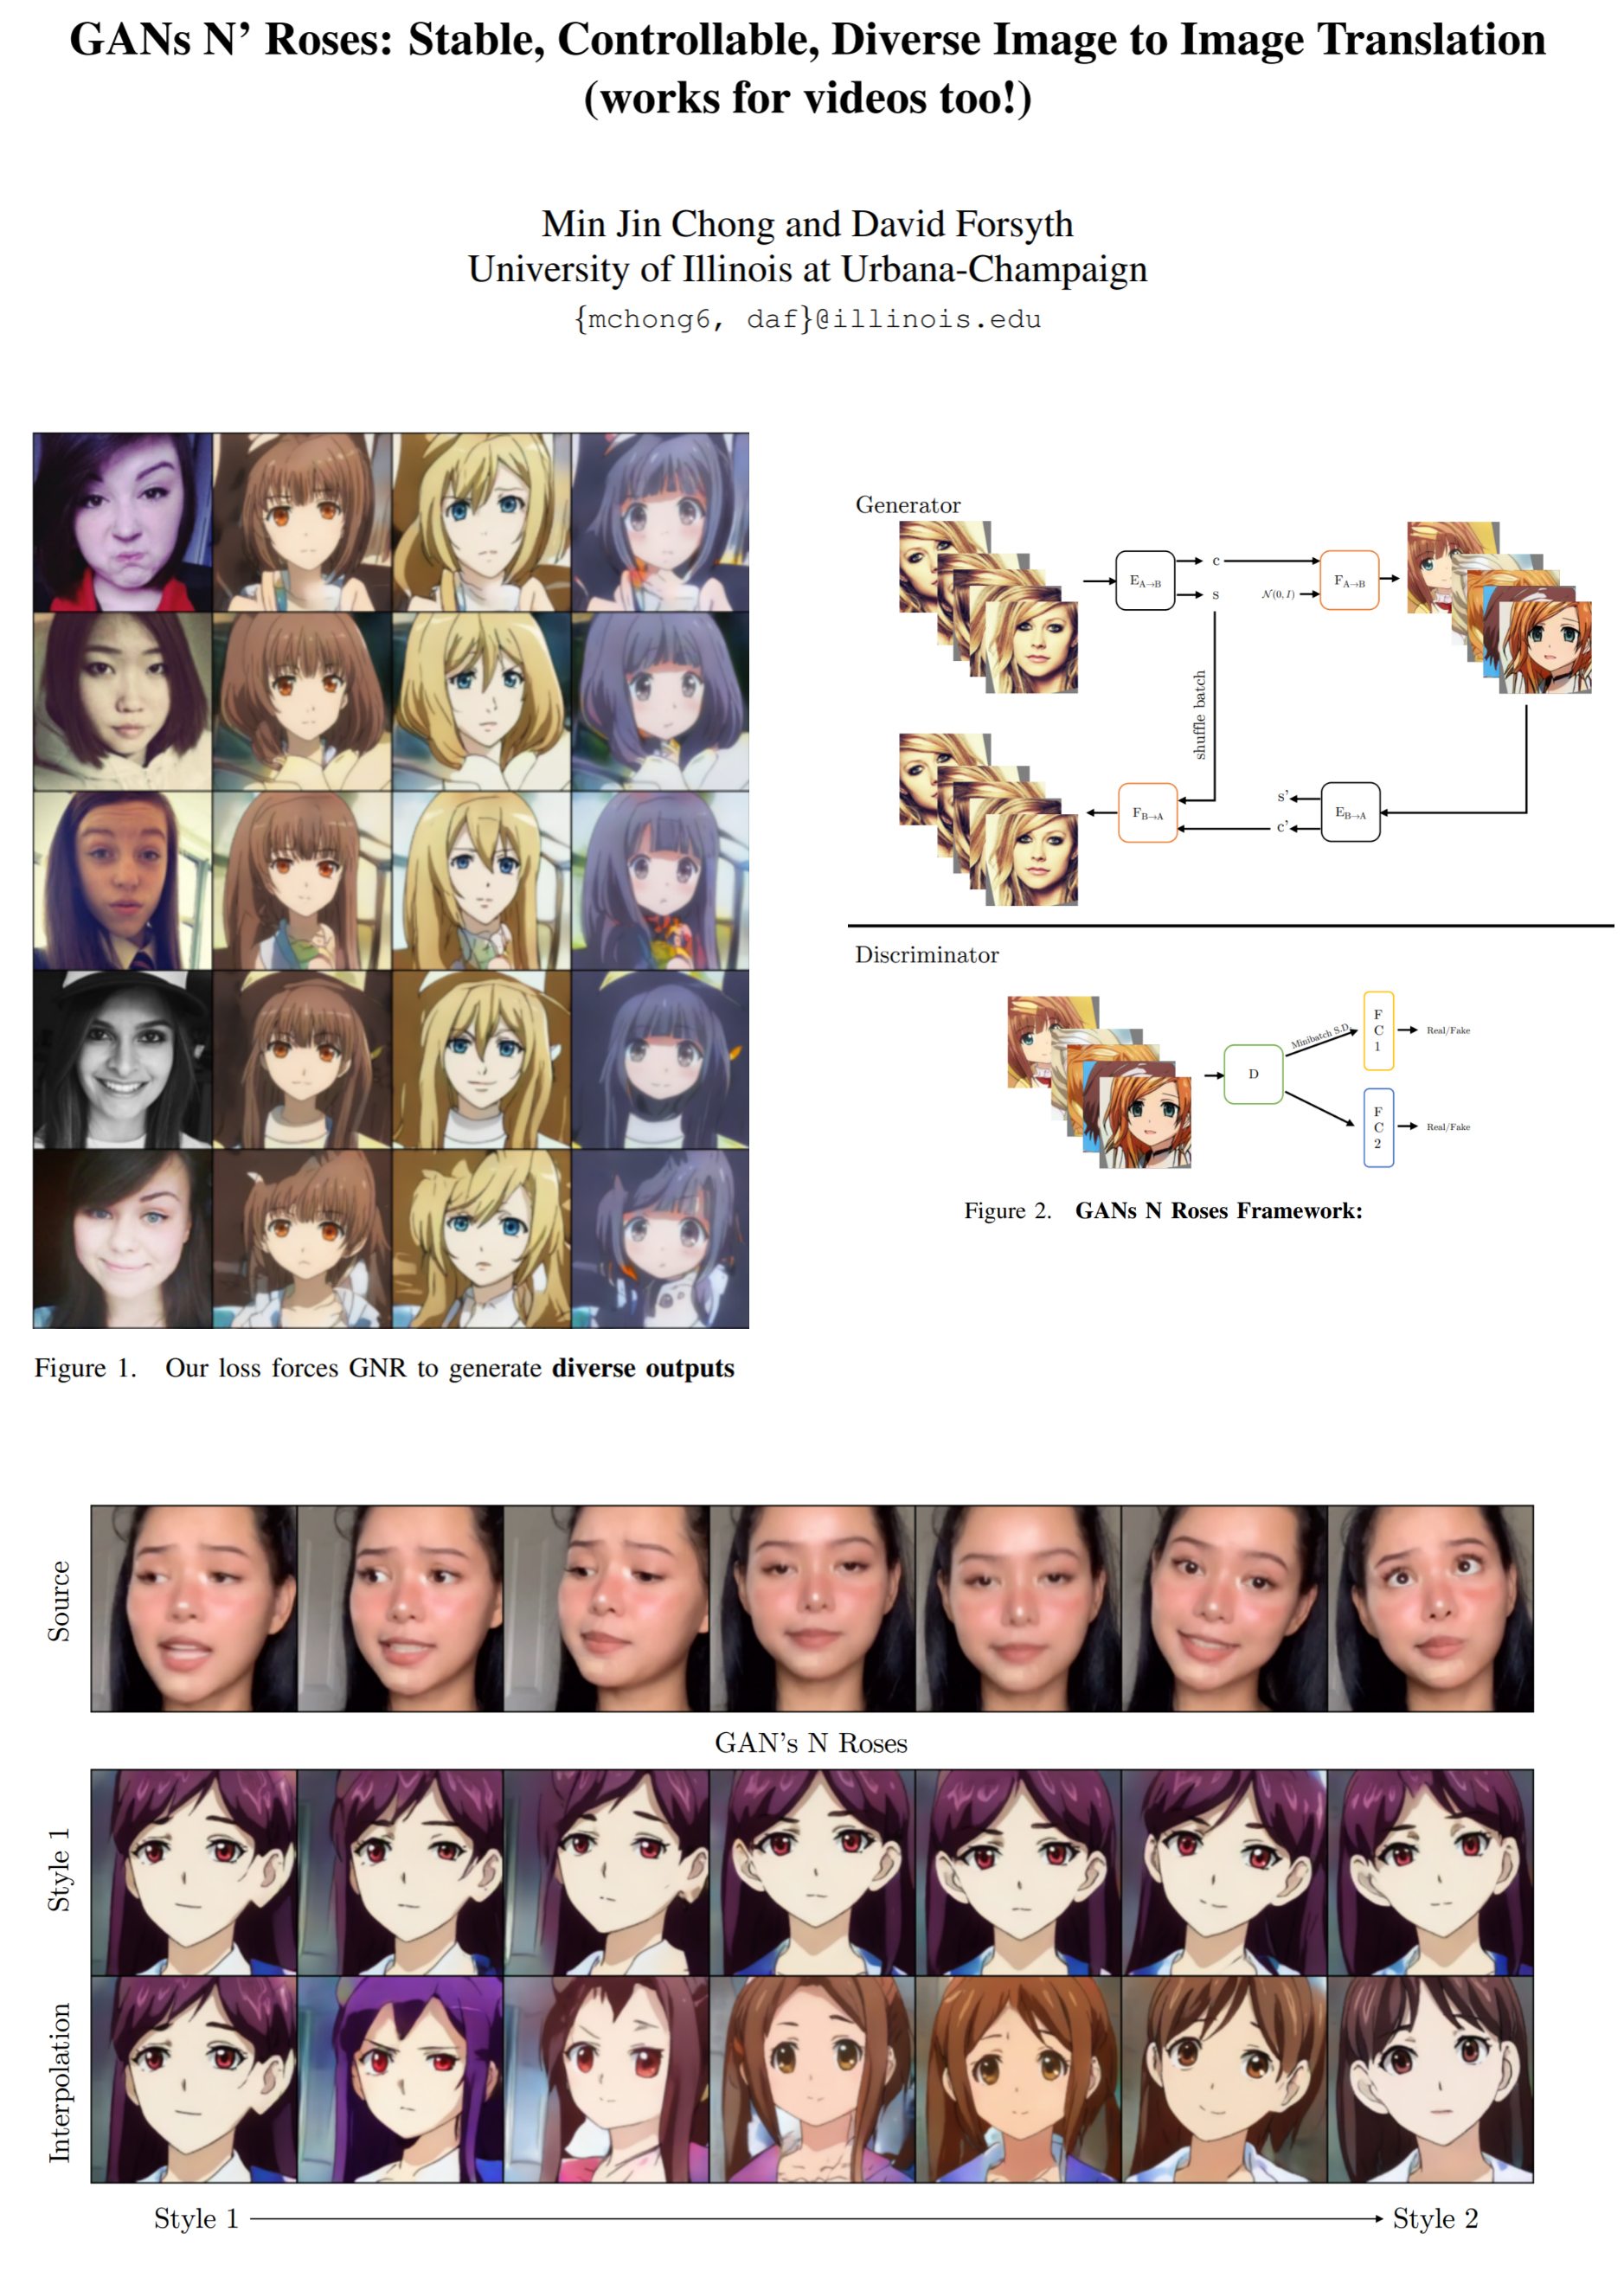 GANs N’ Roses: Stable, Controllable, Diverse Image to Image Translation paper poster